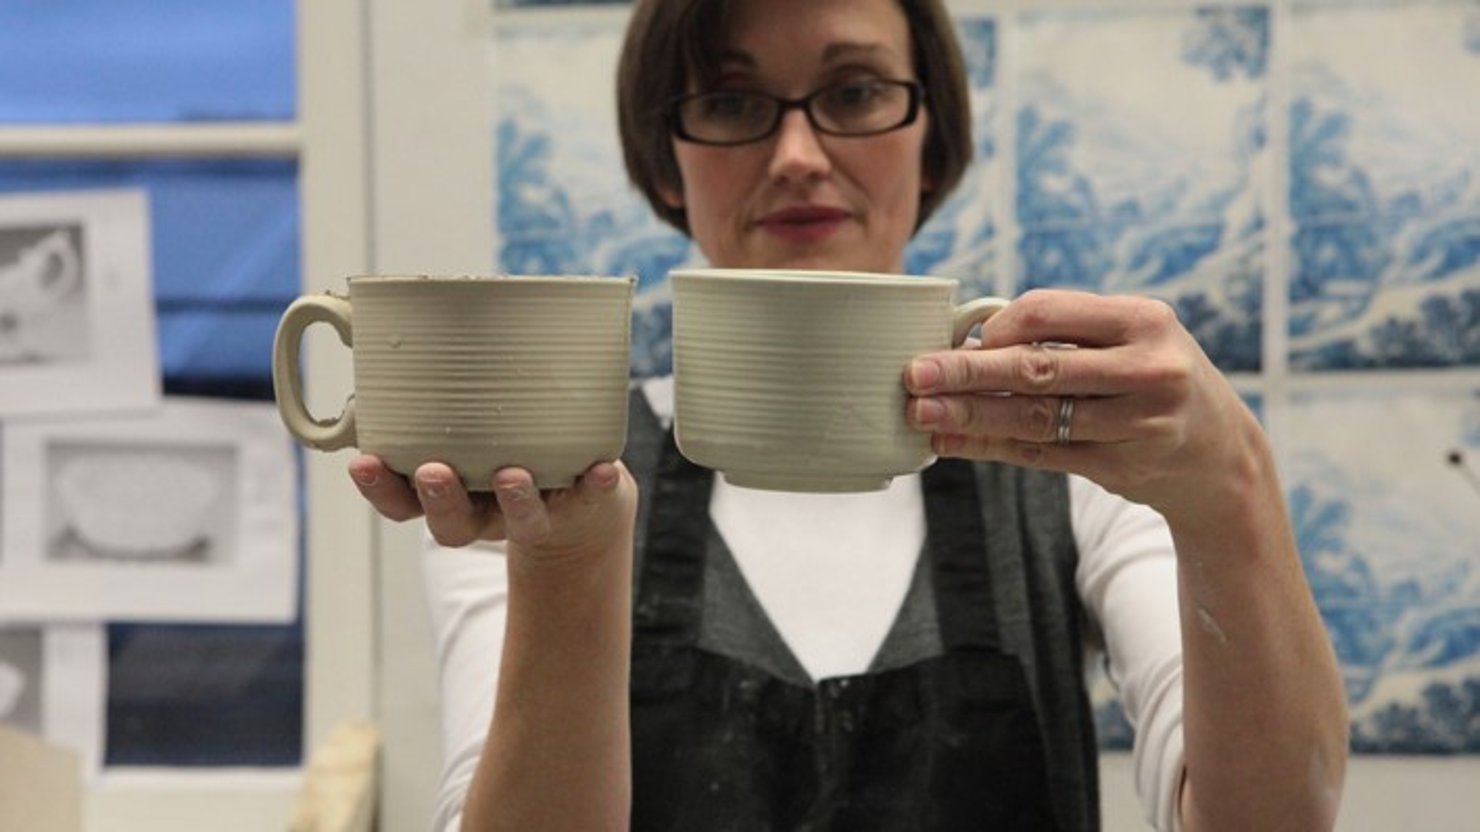 Artist Clare Twomey holds up two ceramic mugs in her studio at the V&A, London